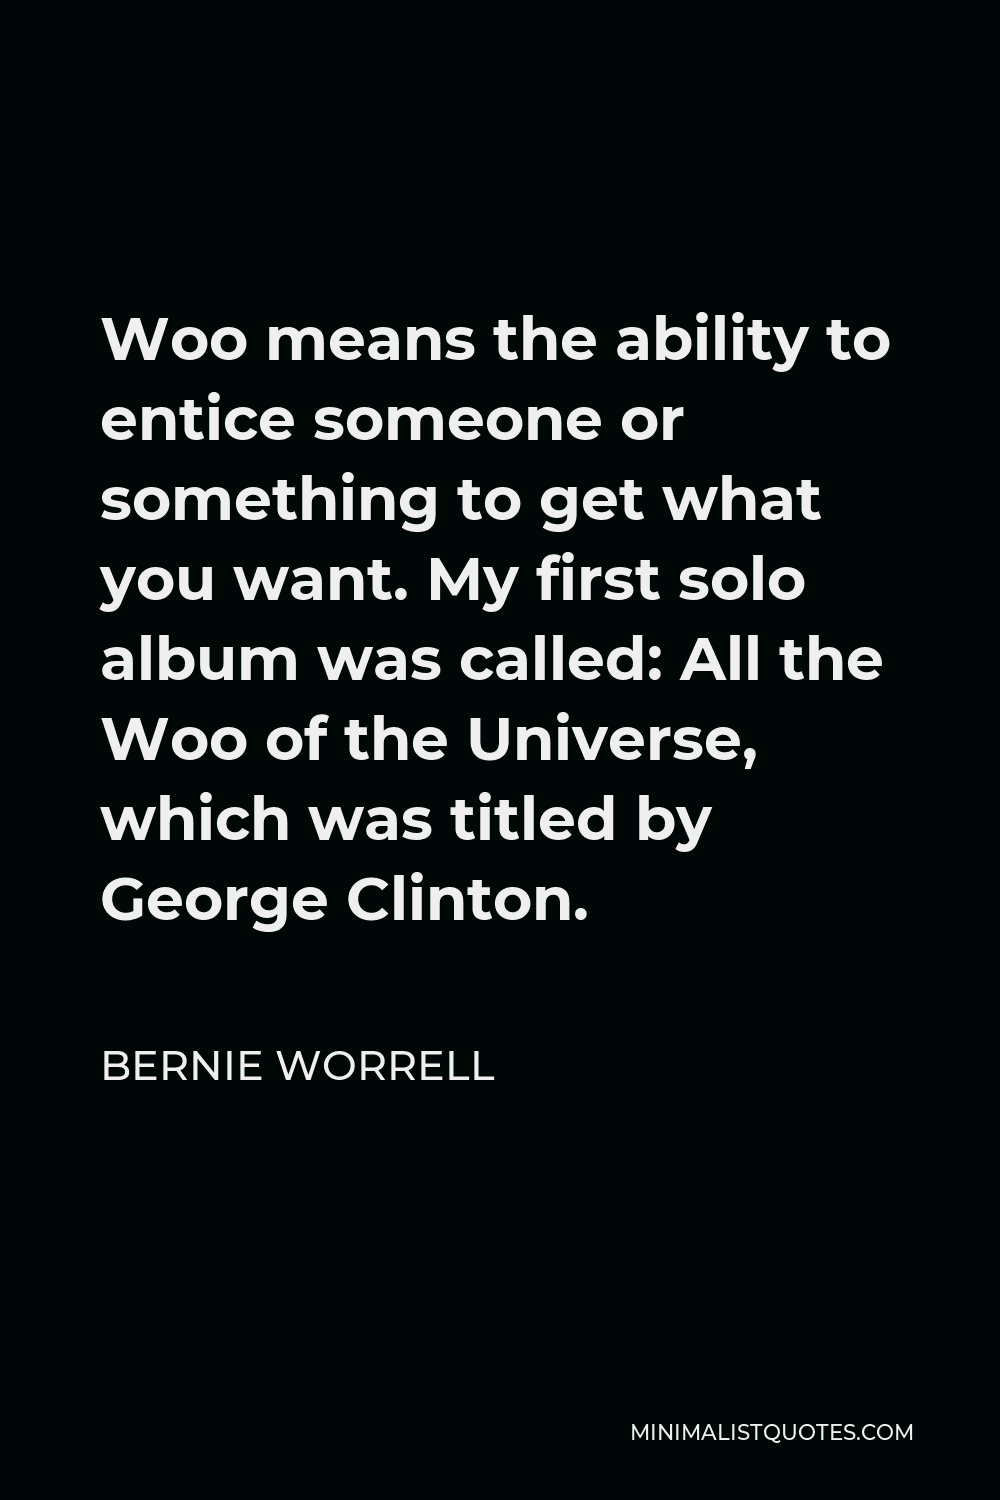 Bernie Worrell Quote - Woo means the ability to entice someone or something to get what you want. My first solo album was called: All the Woo of the Universe, which was titled by George Clinton.